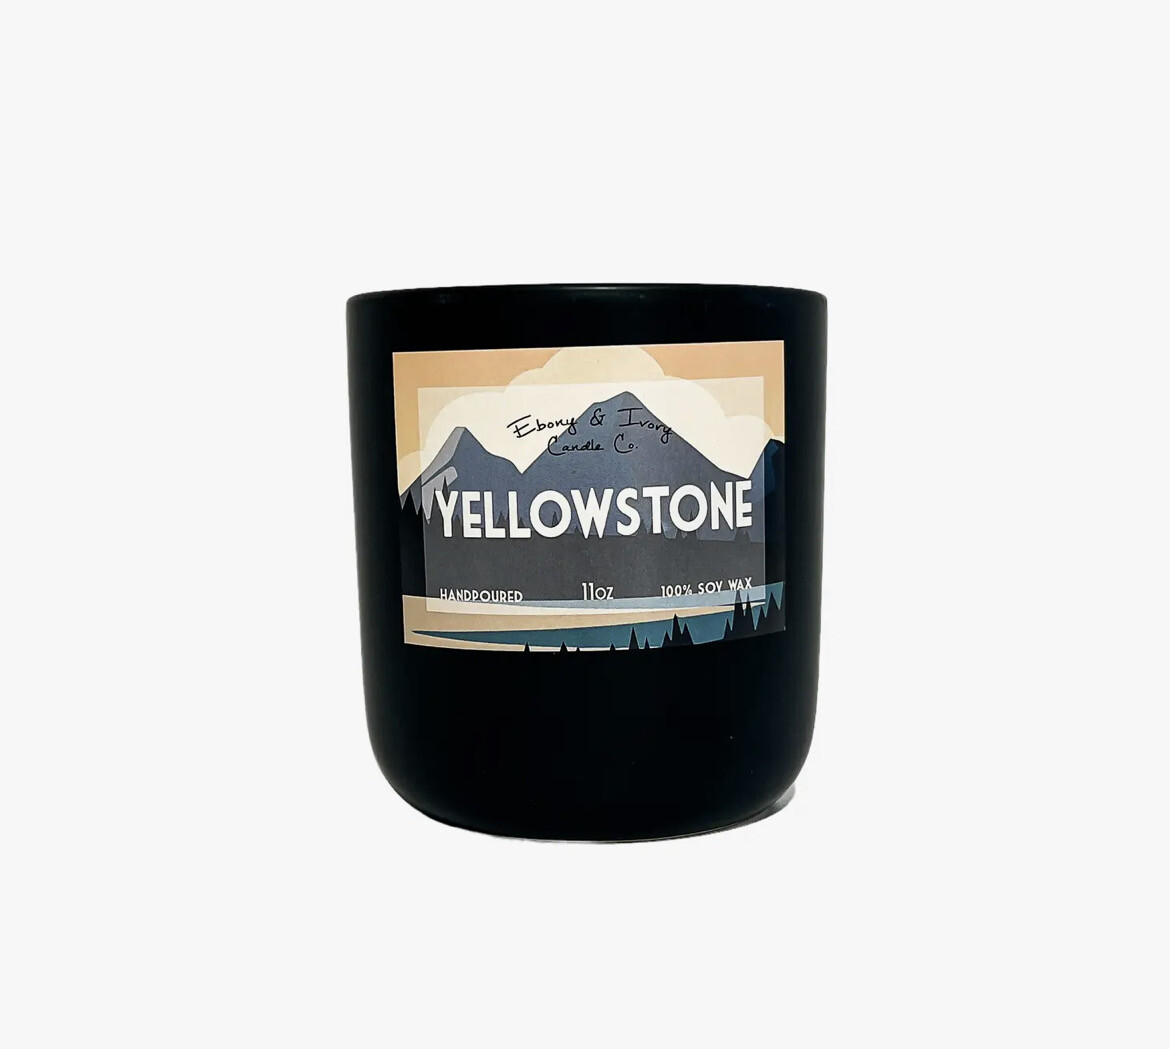 Yellowstone- Yellowstone Collection 16 oz Candle